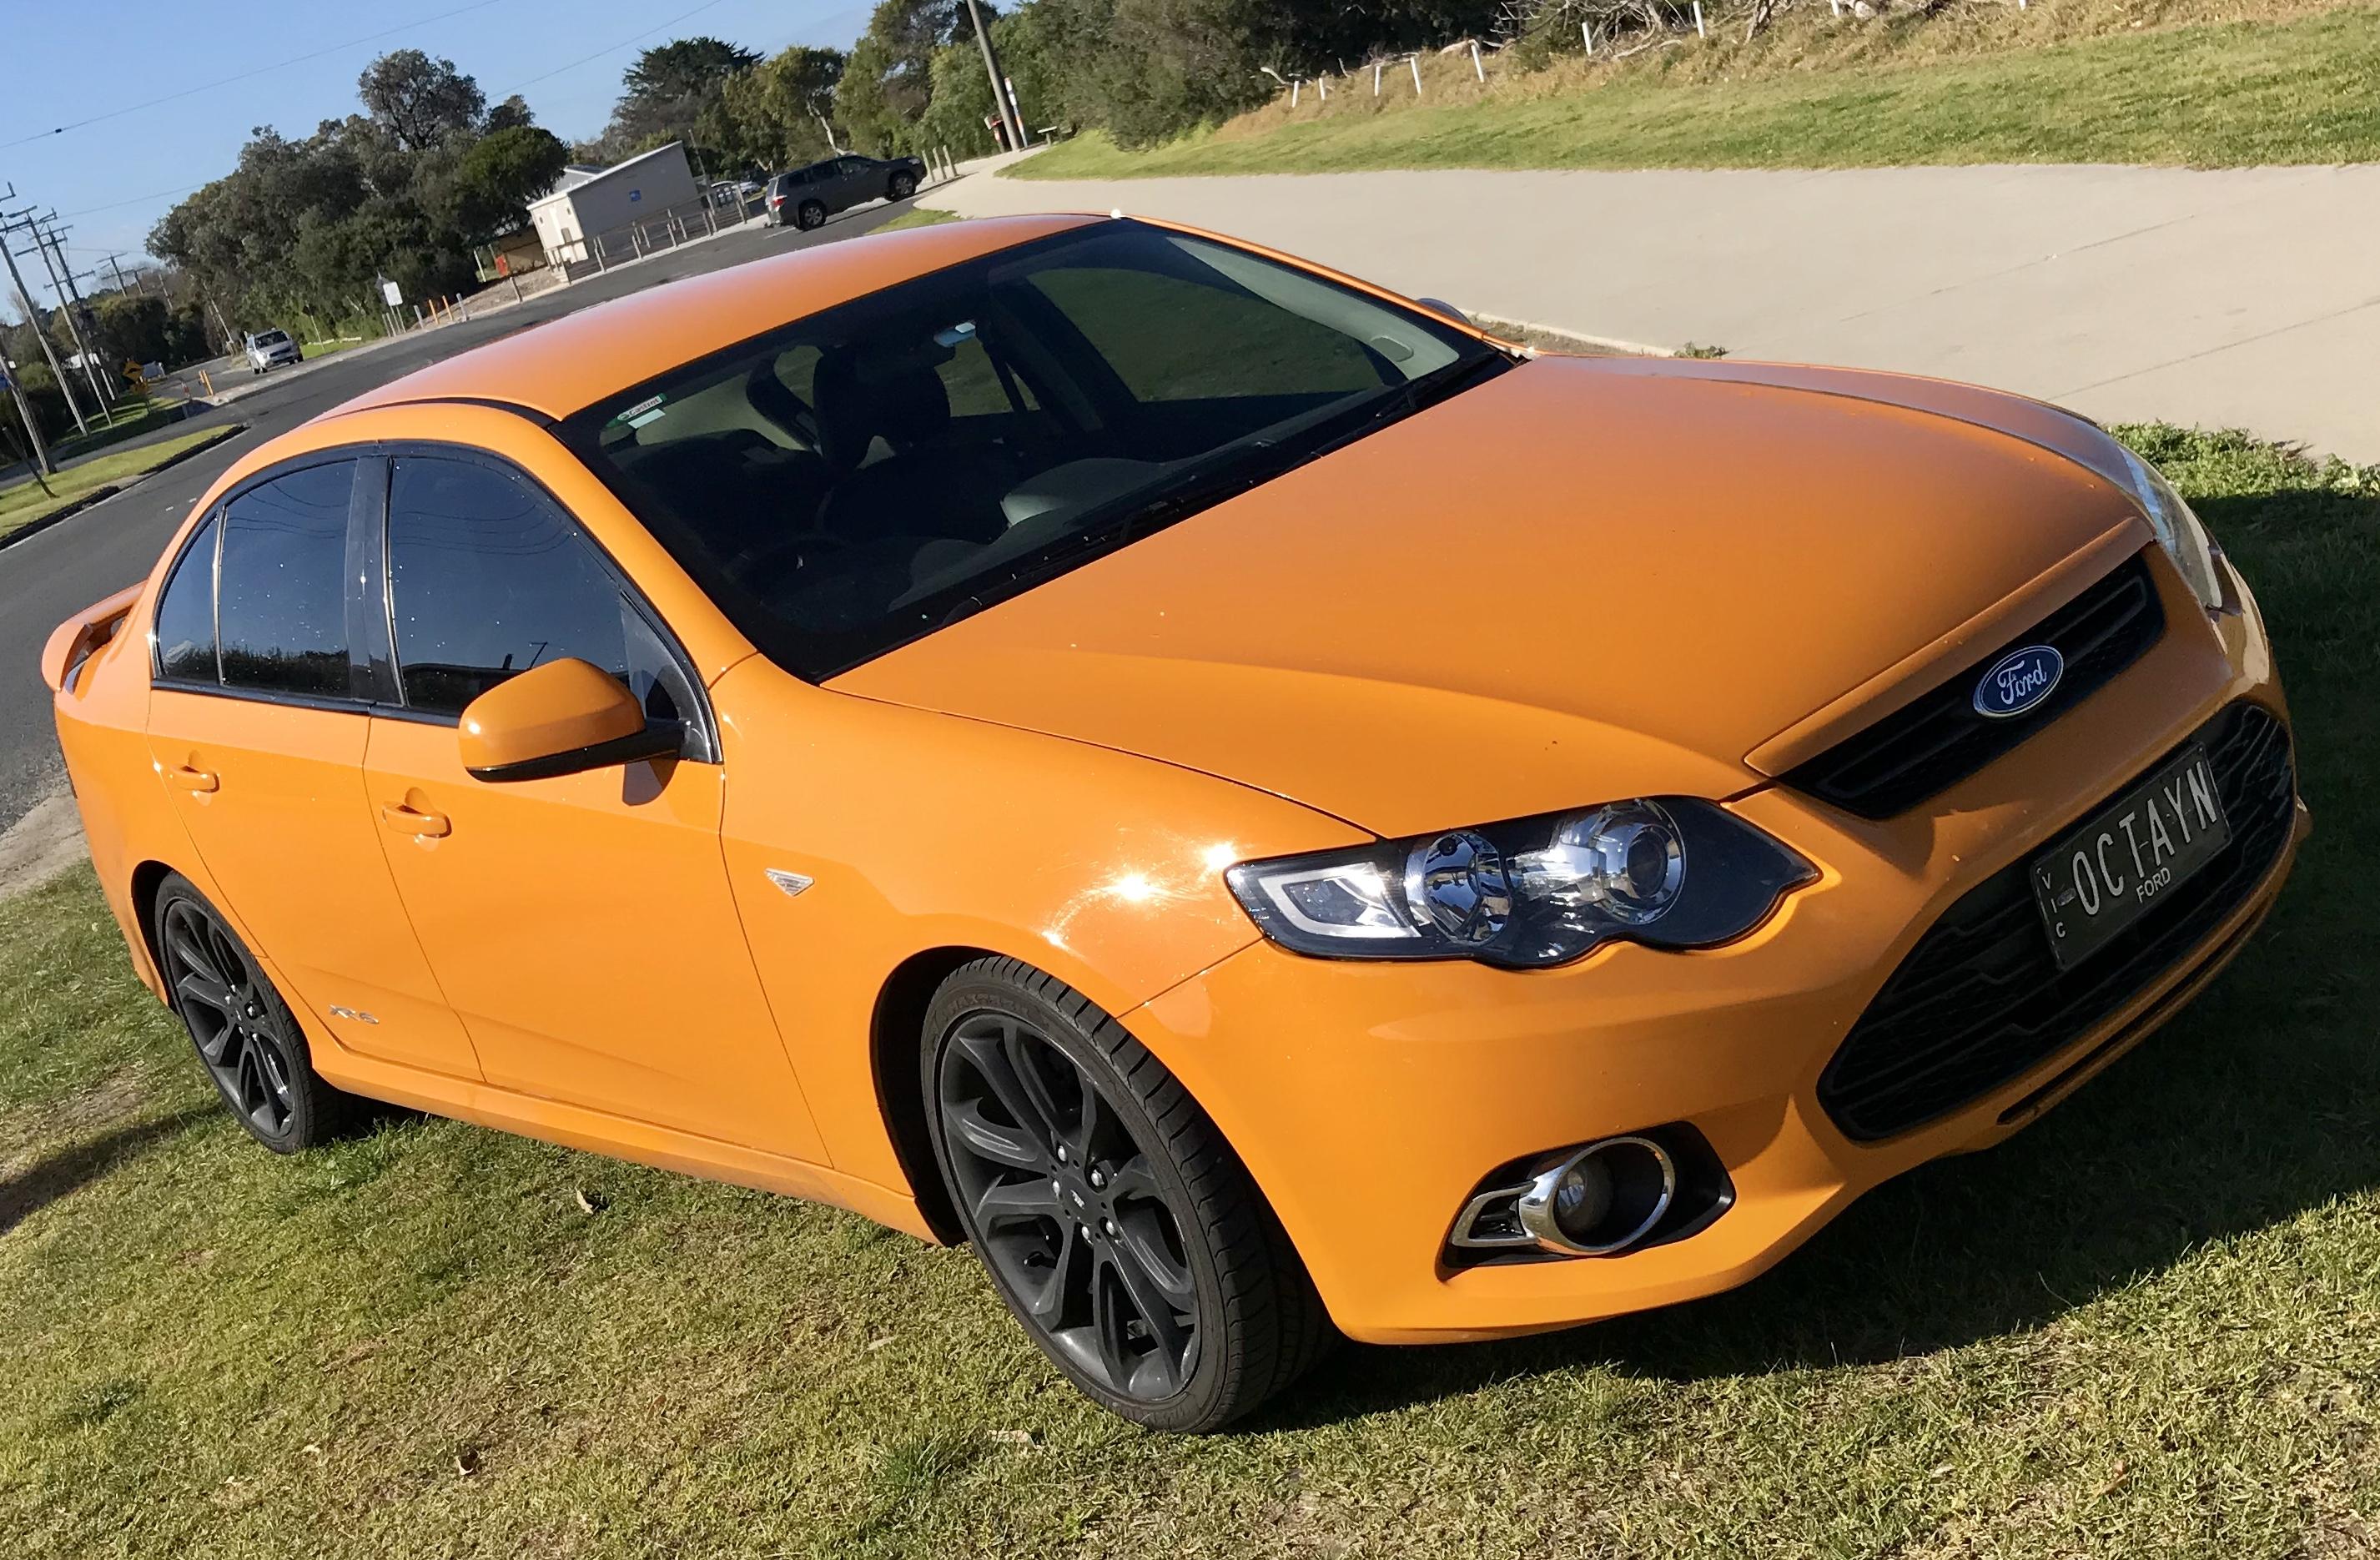 2013 Ford Falcon Fg Mk2 Xr6 Turbo Luxury Pack Jcw5010871 Just Cars